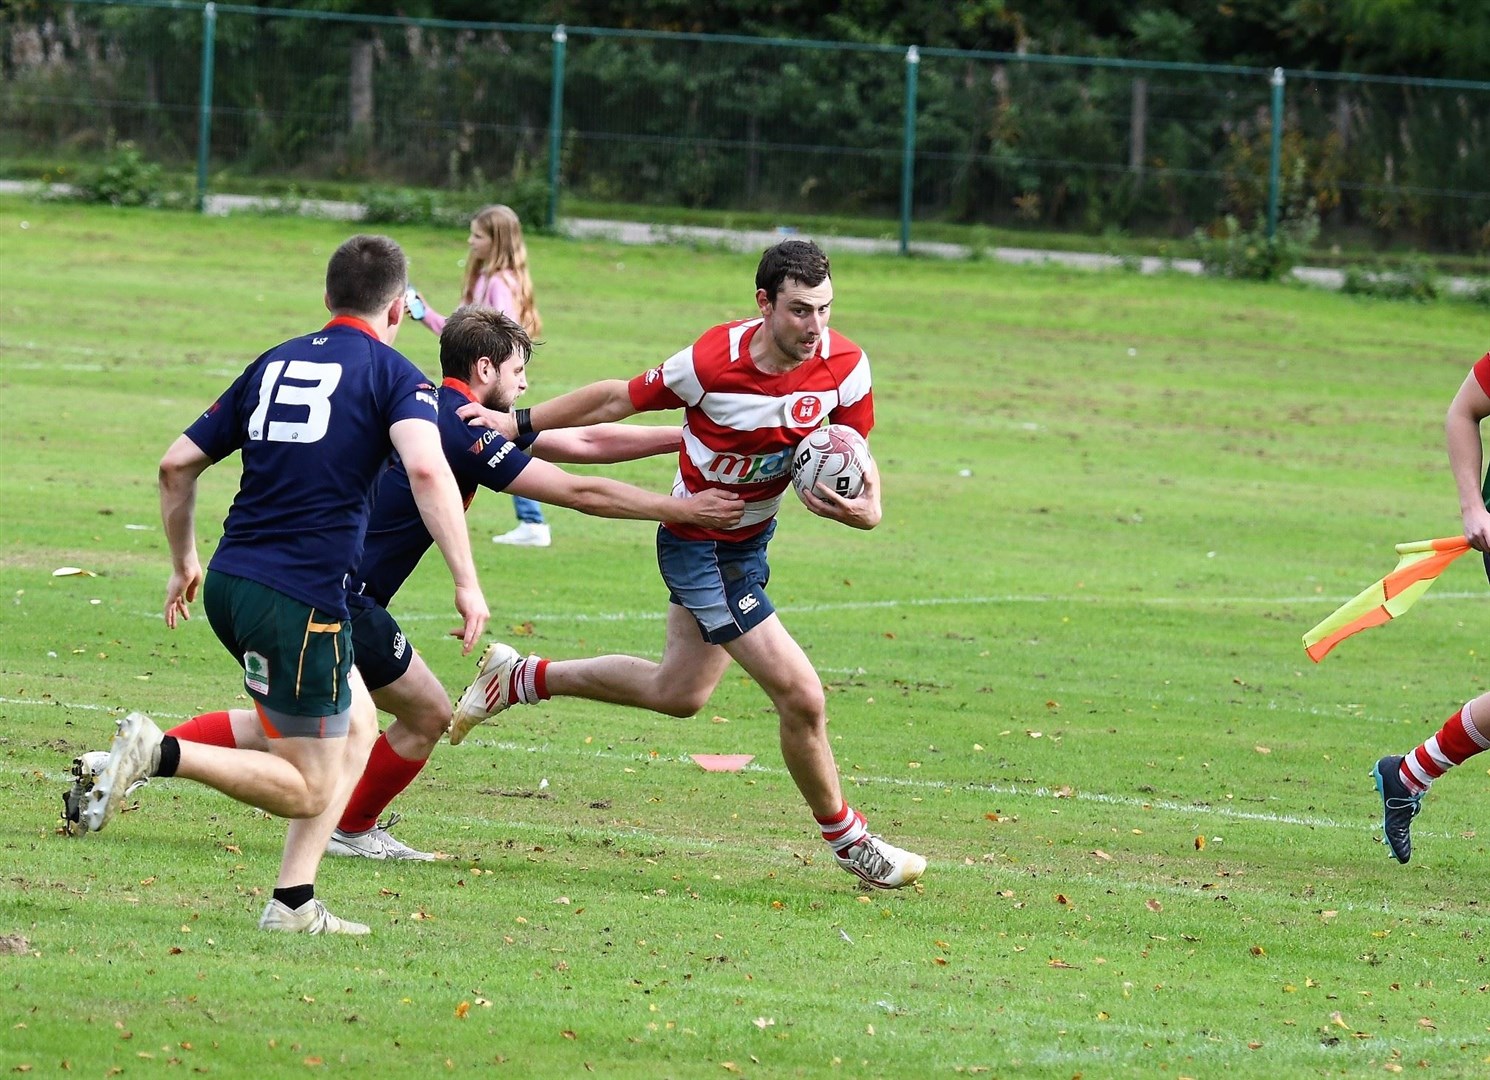 Archie Duncan takes on the defence out wide to score. Picture: James Officer